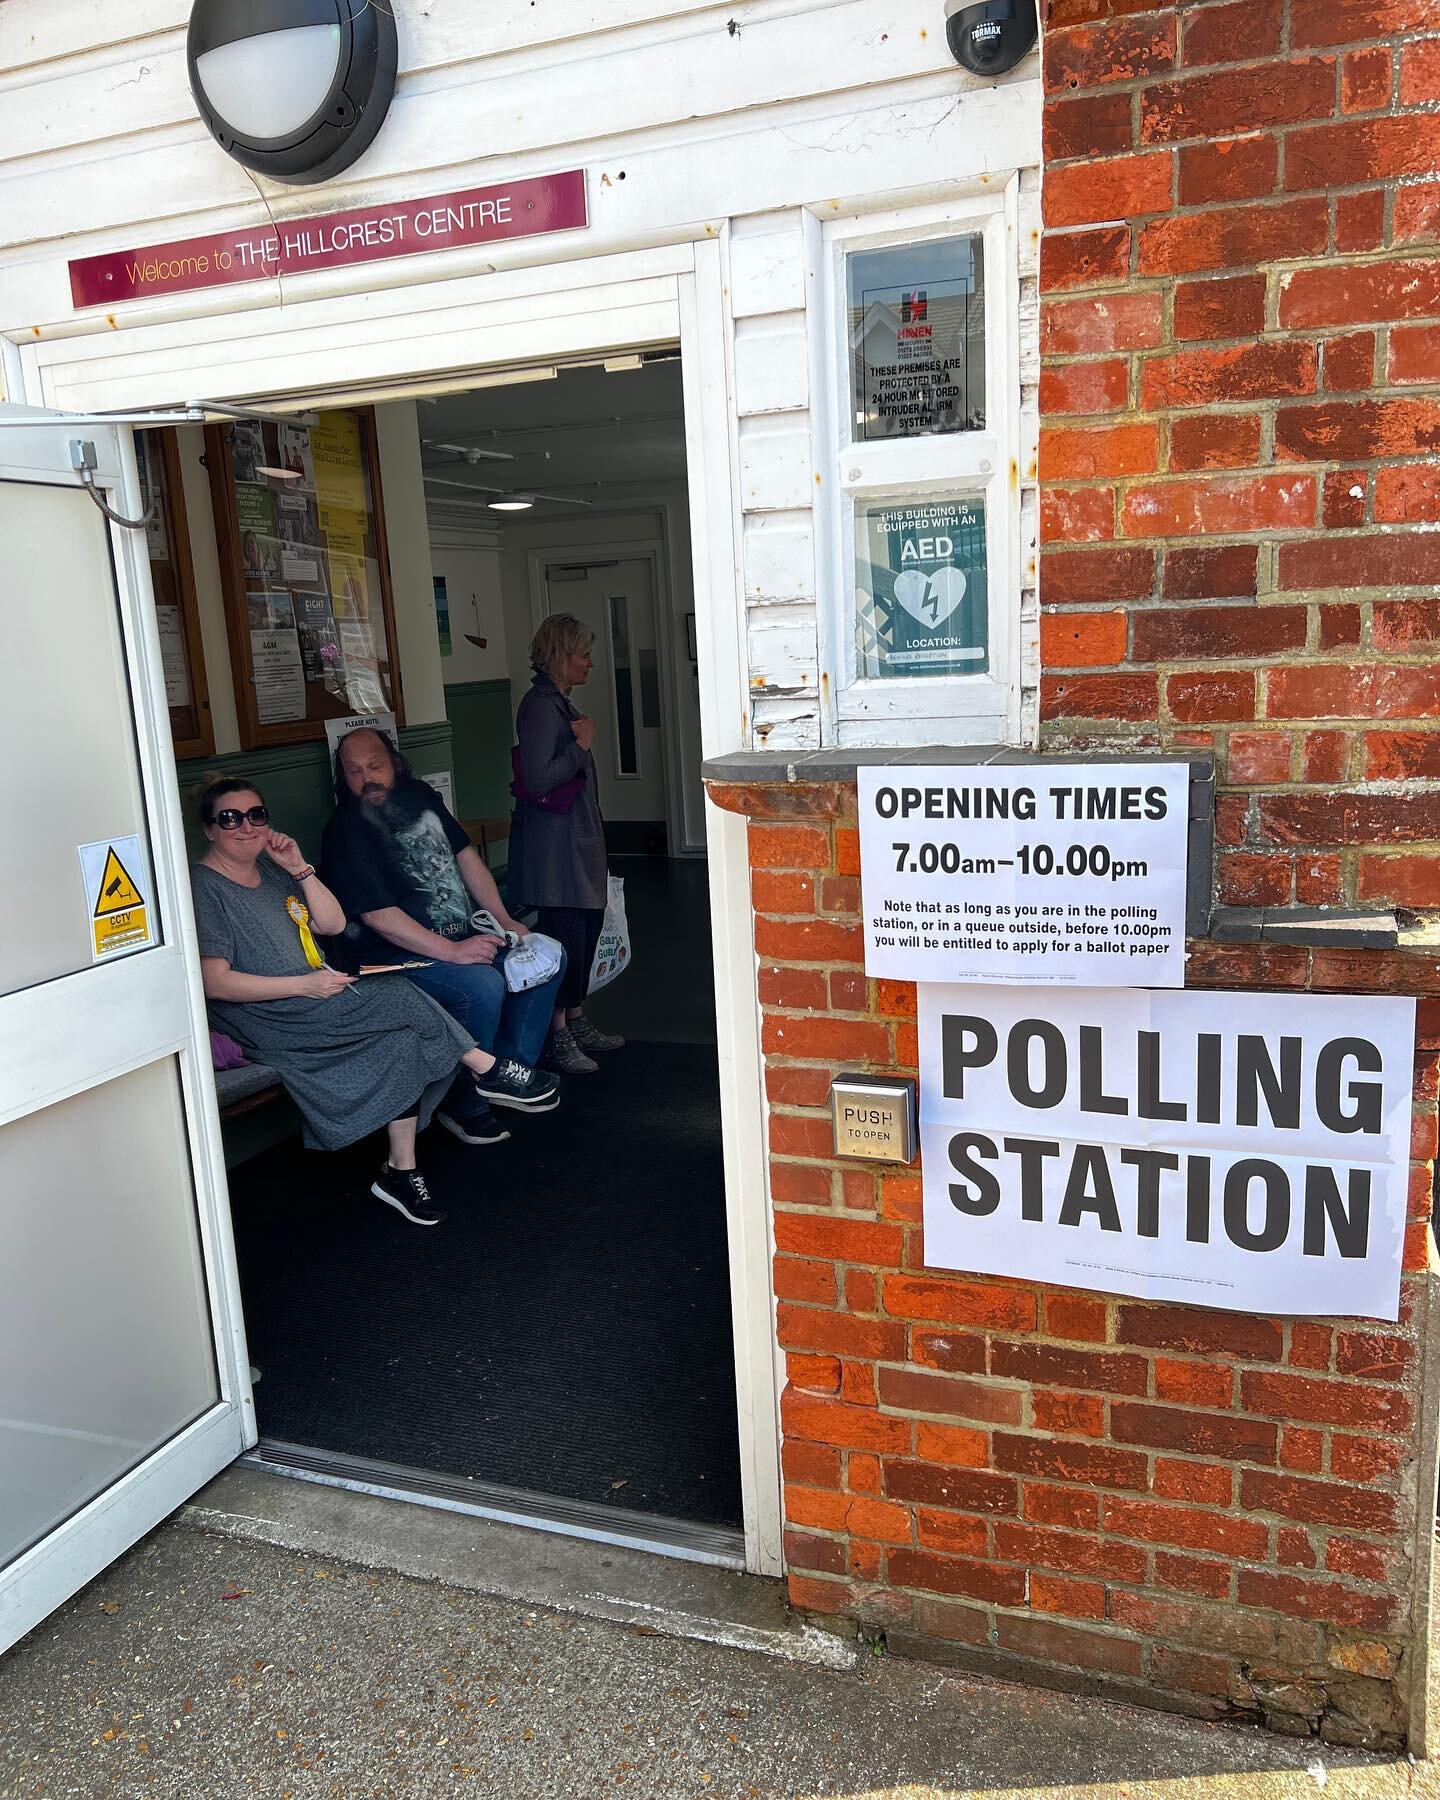 Have you voted yet?

We&rsquo;re open until 10 tonight for you to cast your ballot in the town and district council elections. 

Don&rsquo;t forget to bring your photo ID! 🗳️